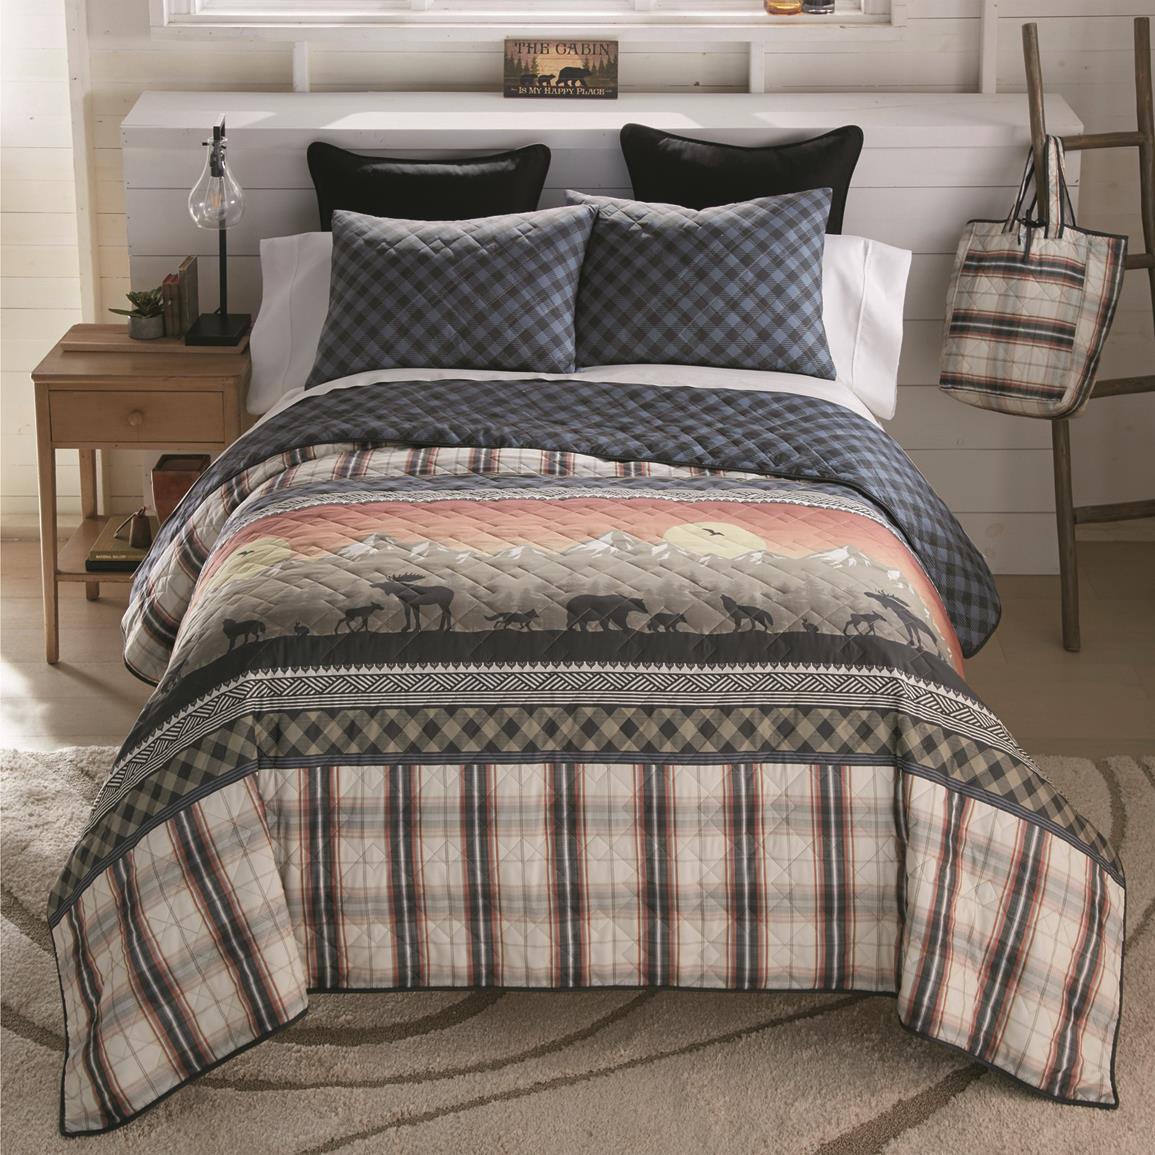 Donna Sharp Smoky Square Throw - 713931, Quilts & Sets at Sportsman's Guide